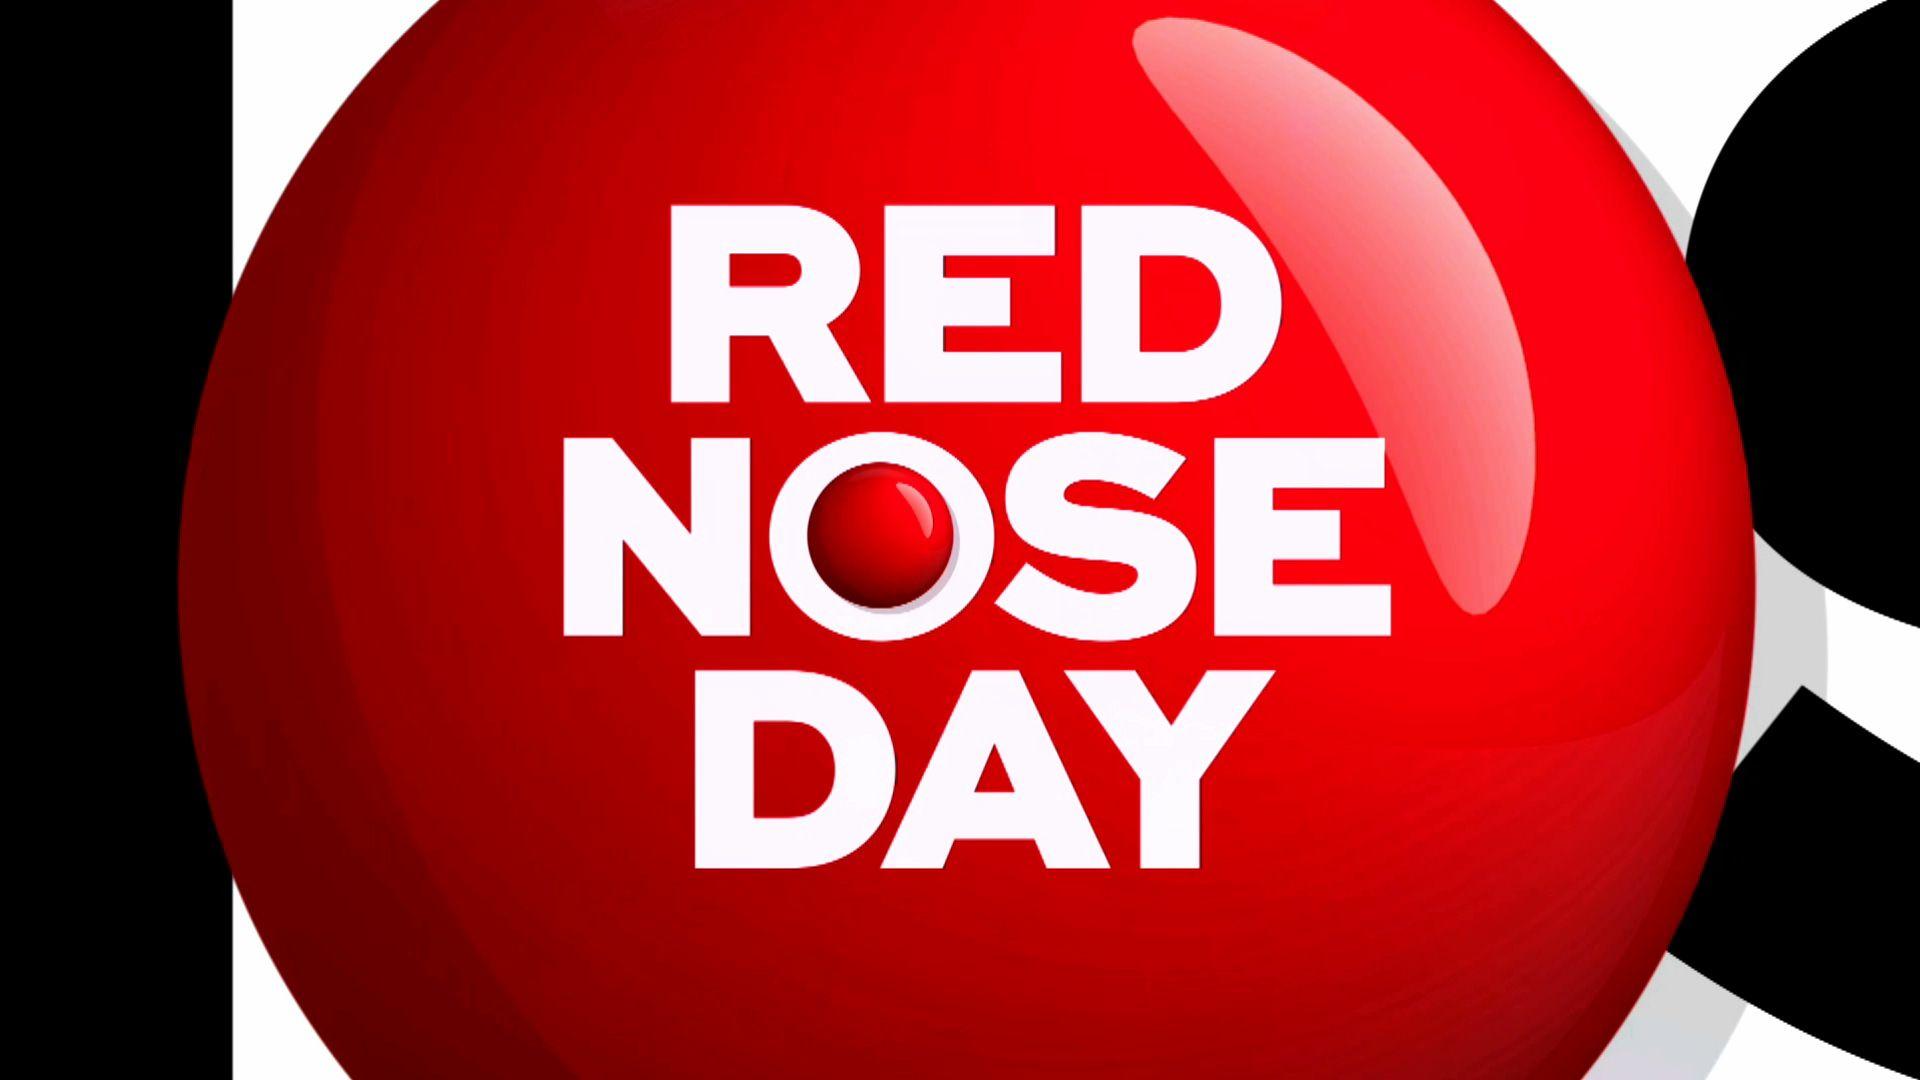 When is red nose day 2021